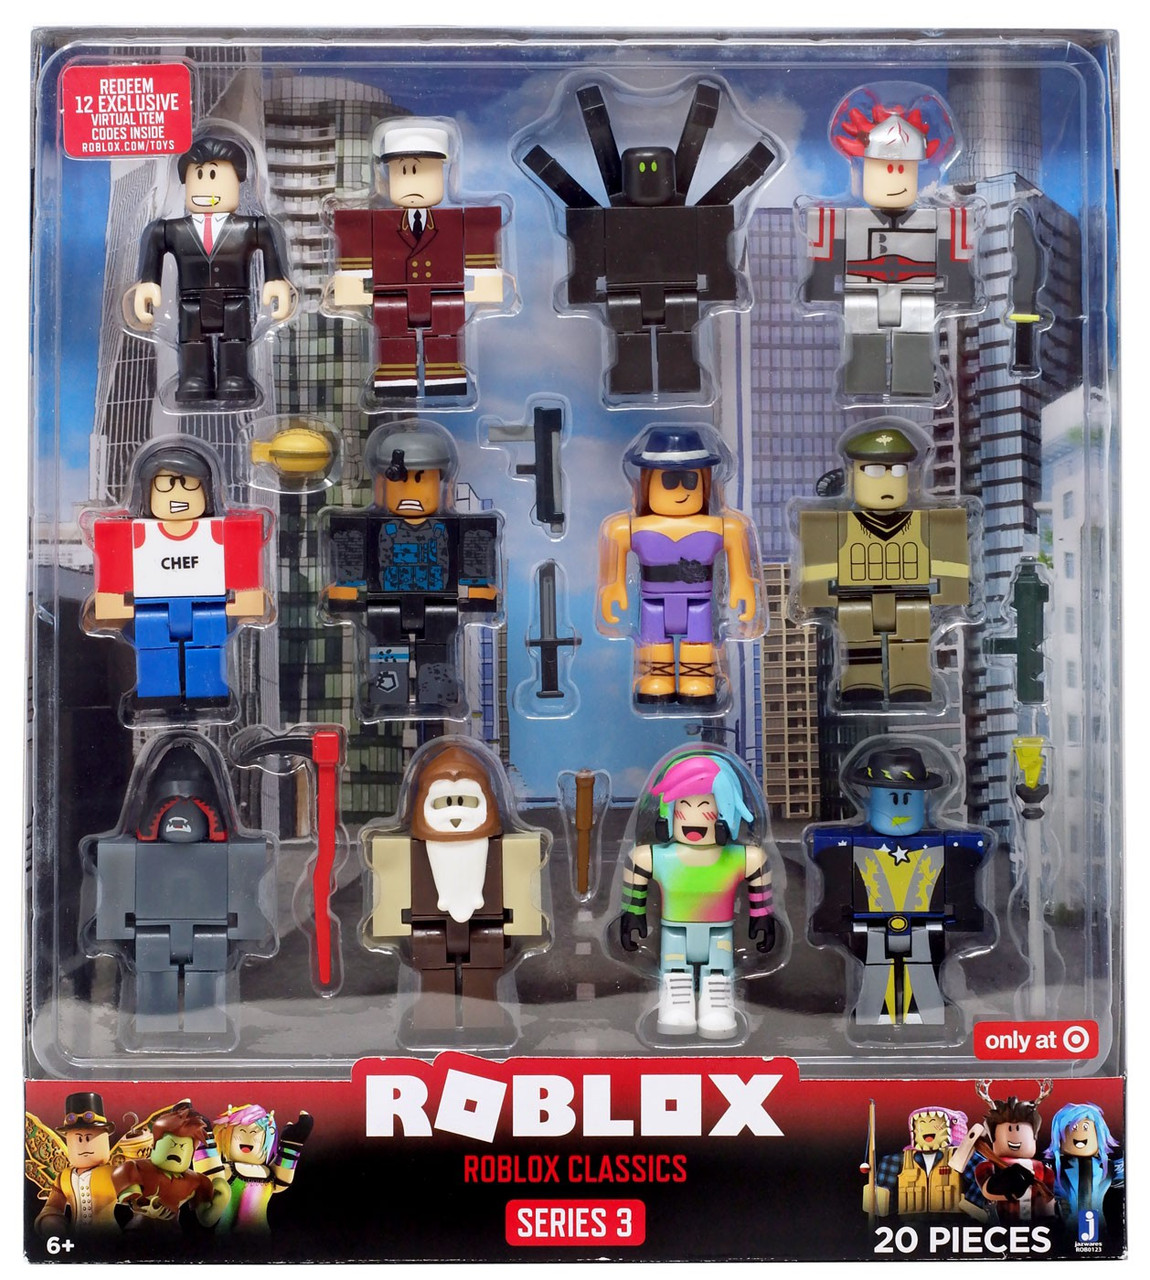 Series 3 Roblox Classics Exclusive Action Figure 12 Pack - roblox classic marvel heroes codes 2018